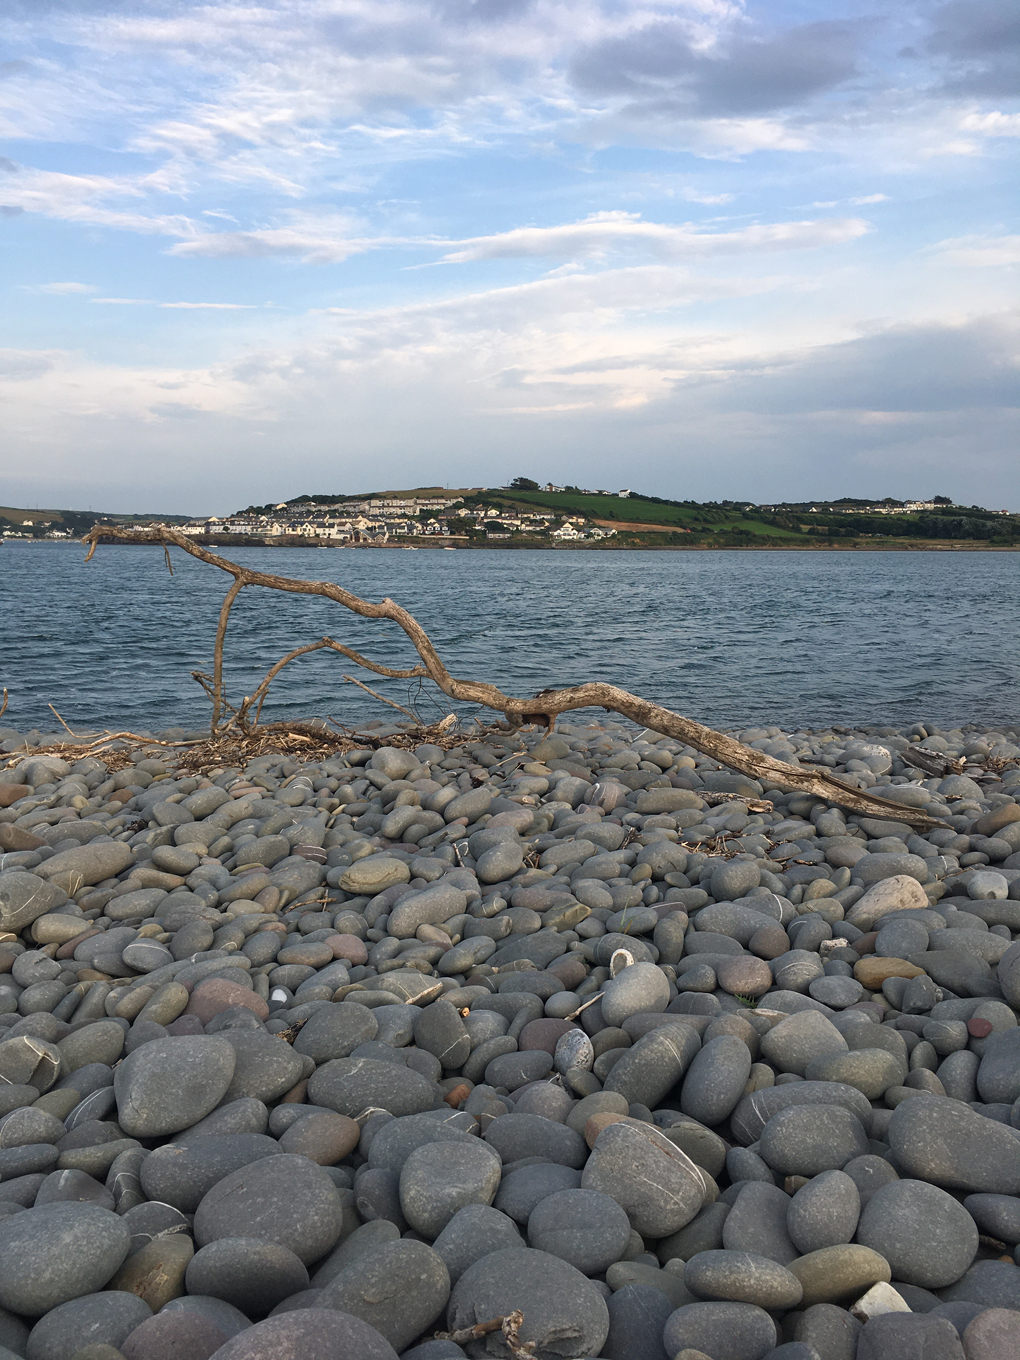 Big twig on rocks with the beach in the background.